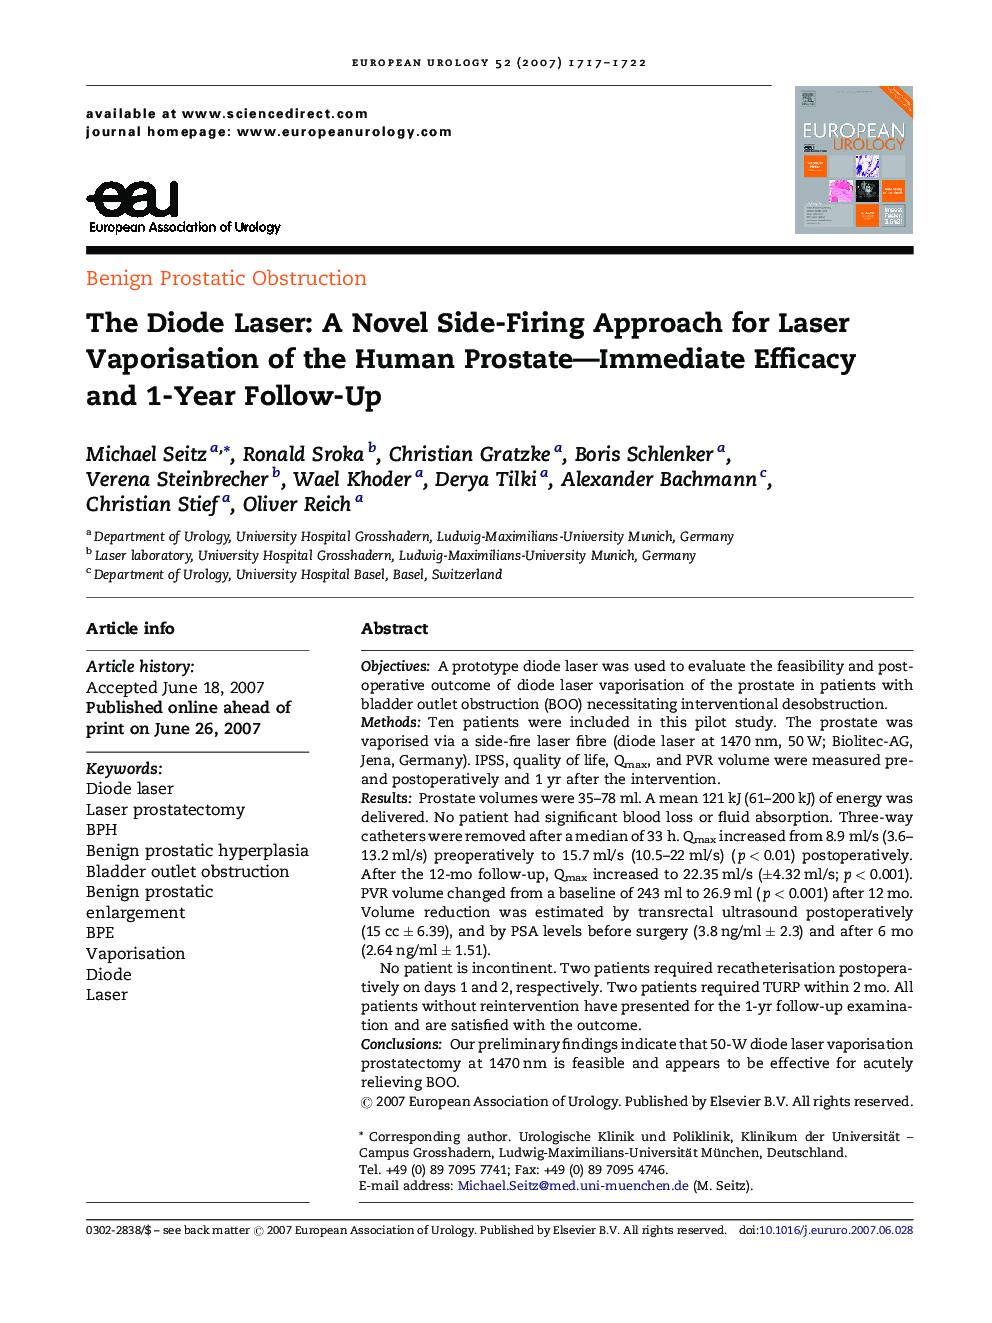 The Diode Laser: A Novel Side-Firing Approach for Laser Vaporisation of the Human Prostate—Immediate Efficacy and 1-Year Follow-Up